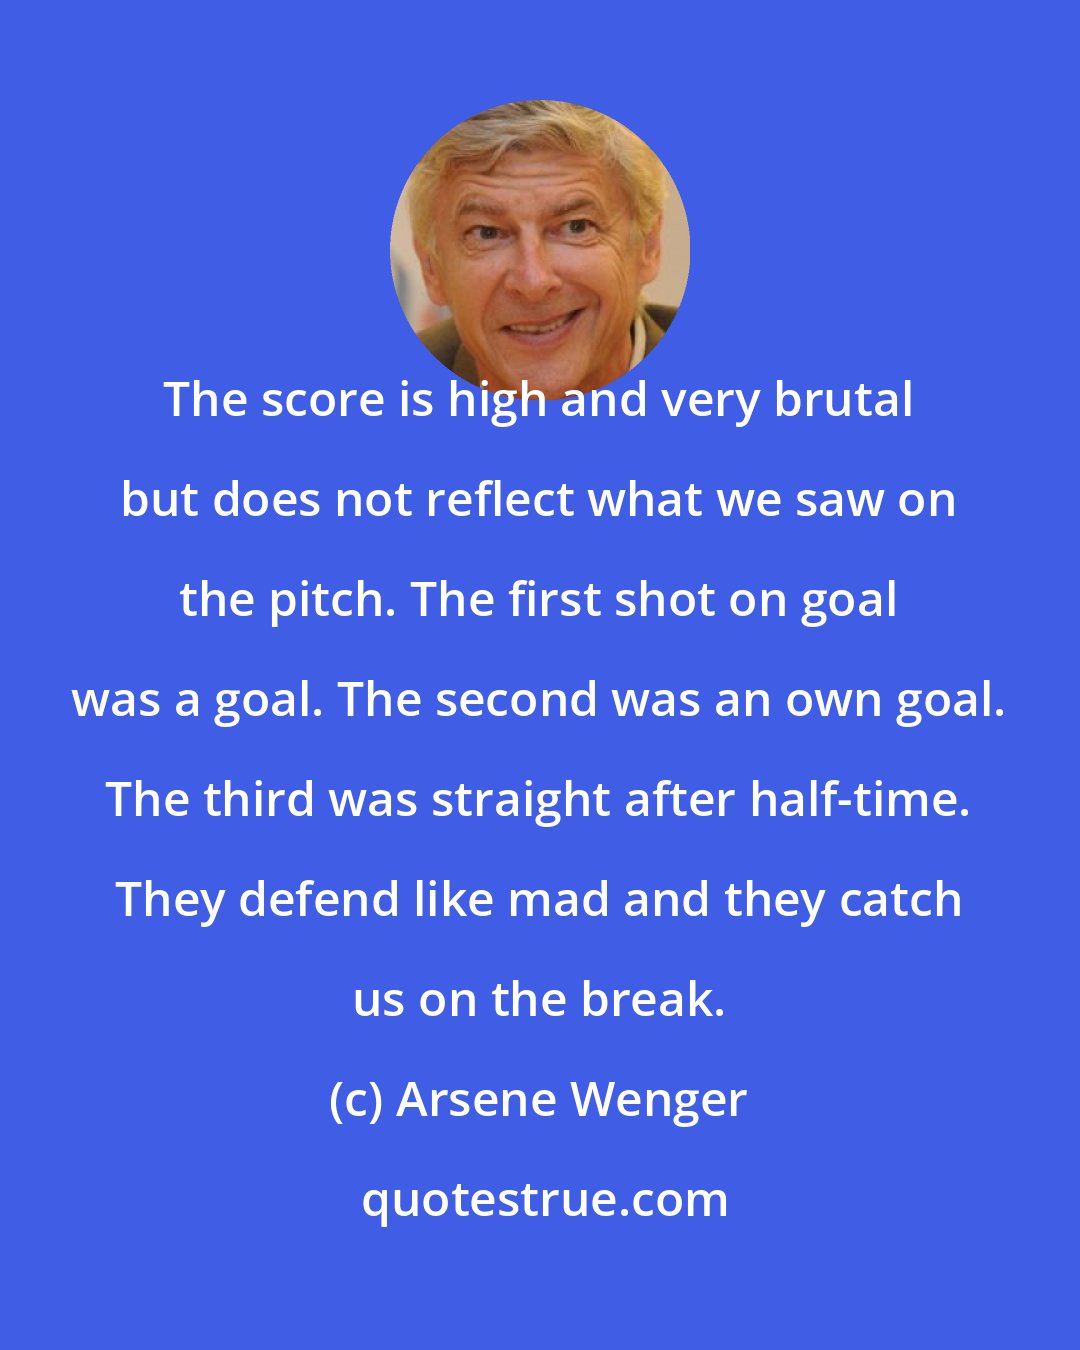 Arsene Wenger: The score is high and very brutal but does not reflect what we saw on the pitch. The first shot on goal was a goal. The second was an own goal. The third was straight after half-time. They defend like mad and they catch us on the break.